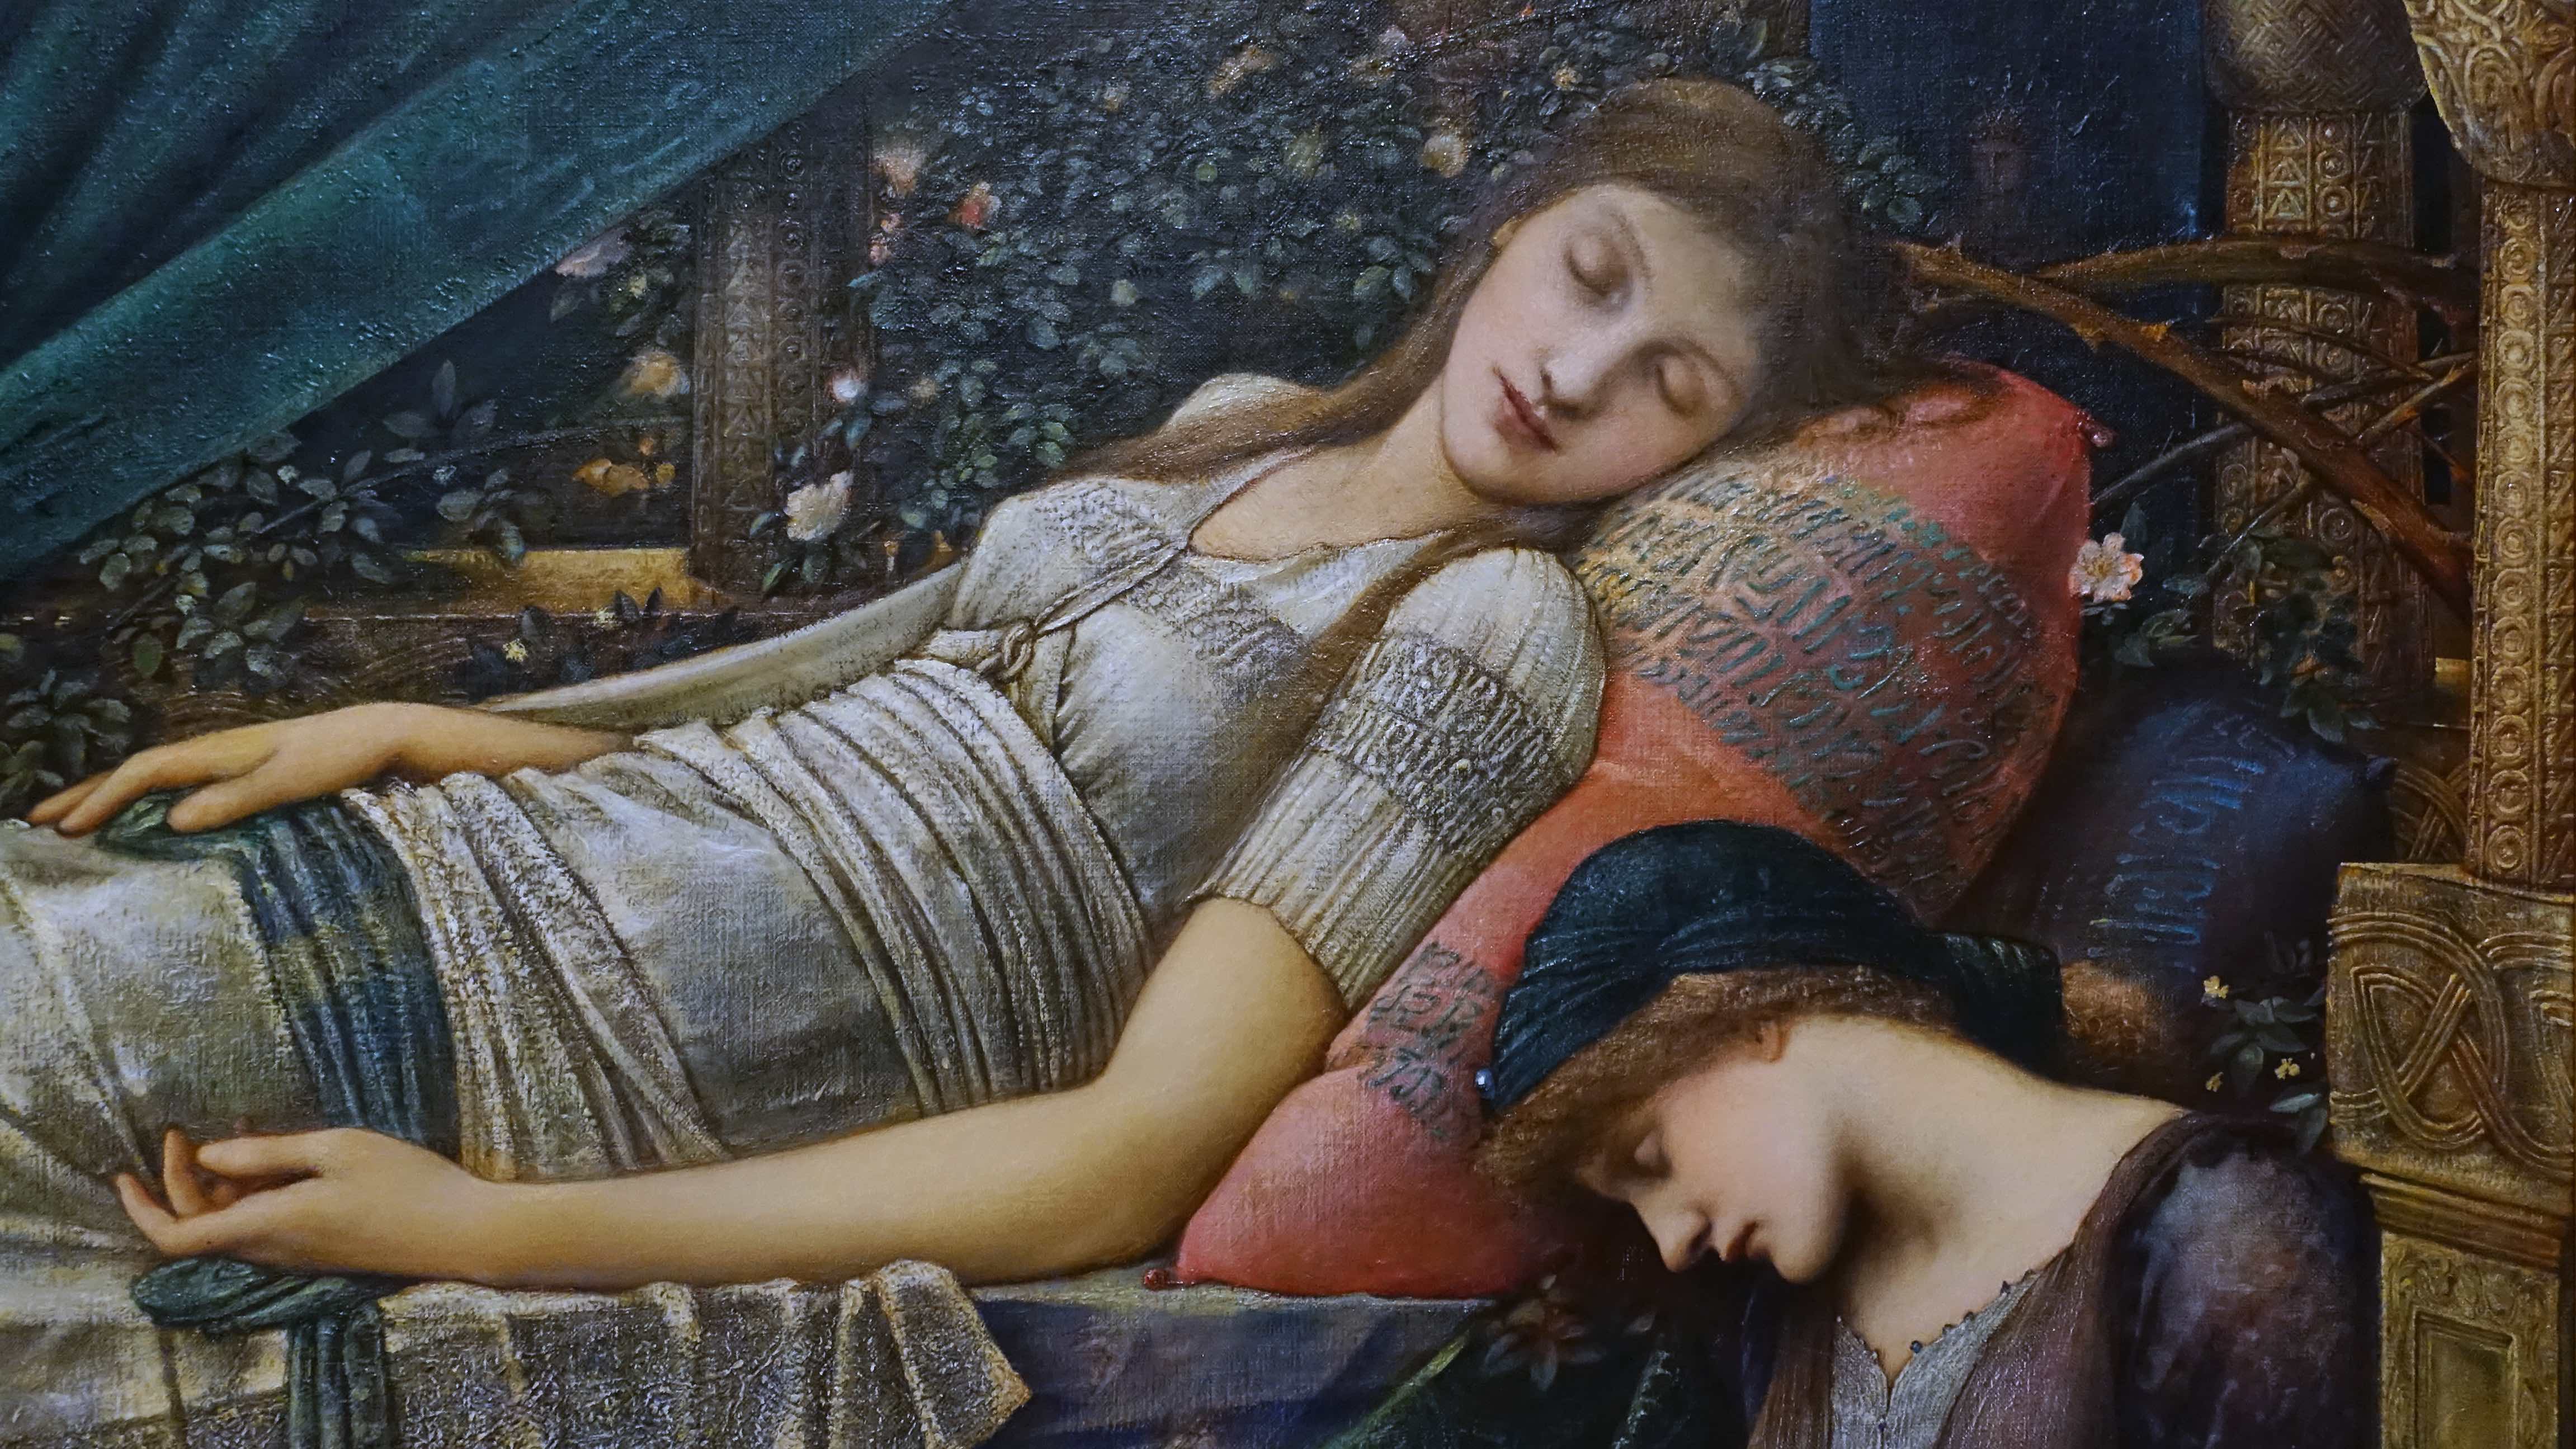 Edward Burne Jones, The Briar Rose (The Briar Rose, The Council Chamber, The Garden Court, and The Rose Bower), c. 1890, oil on canvas (Buscot Park)